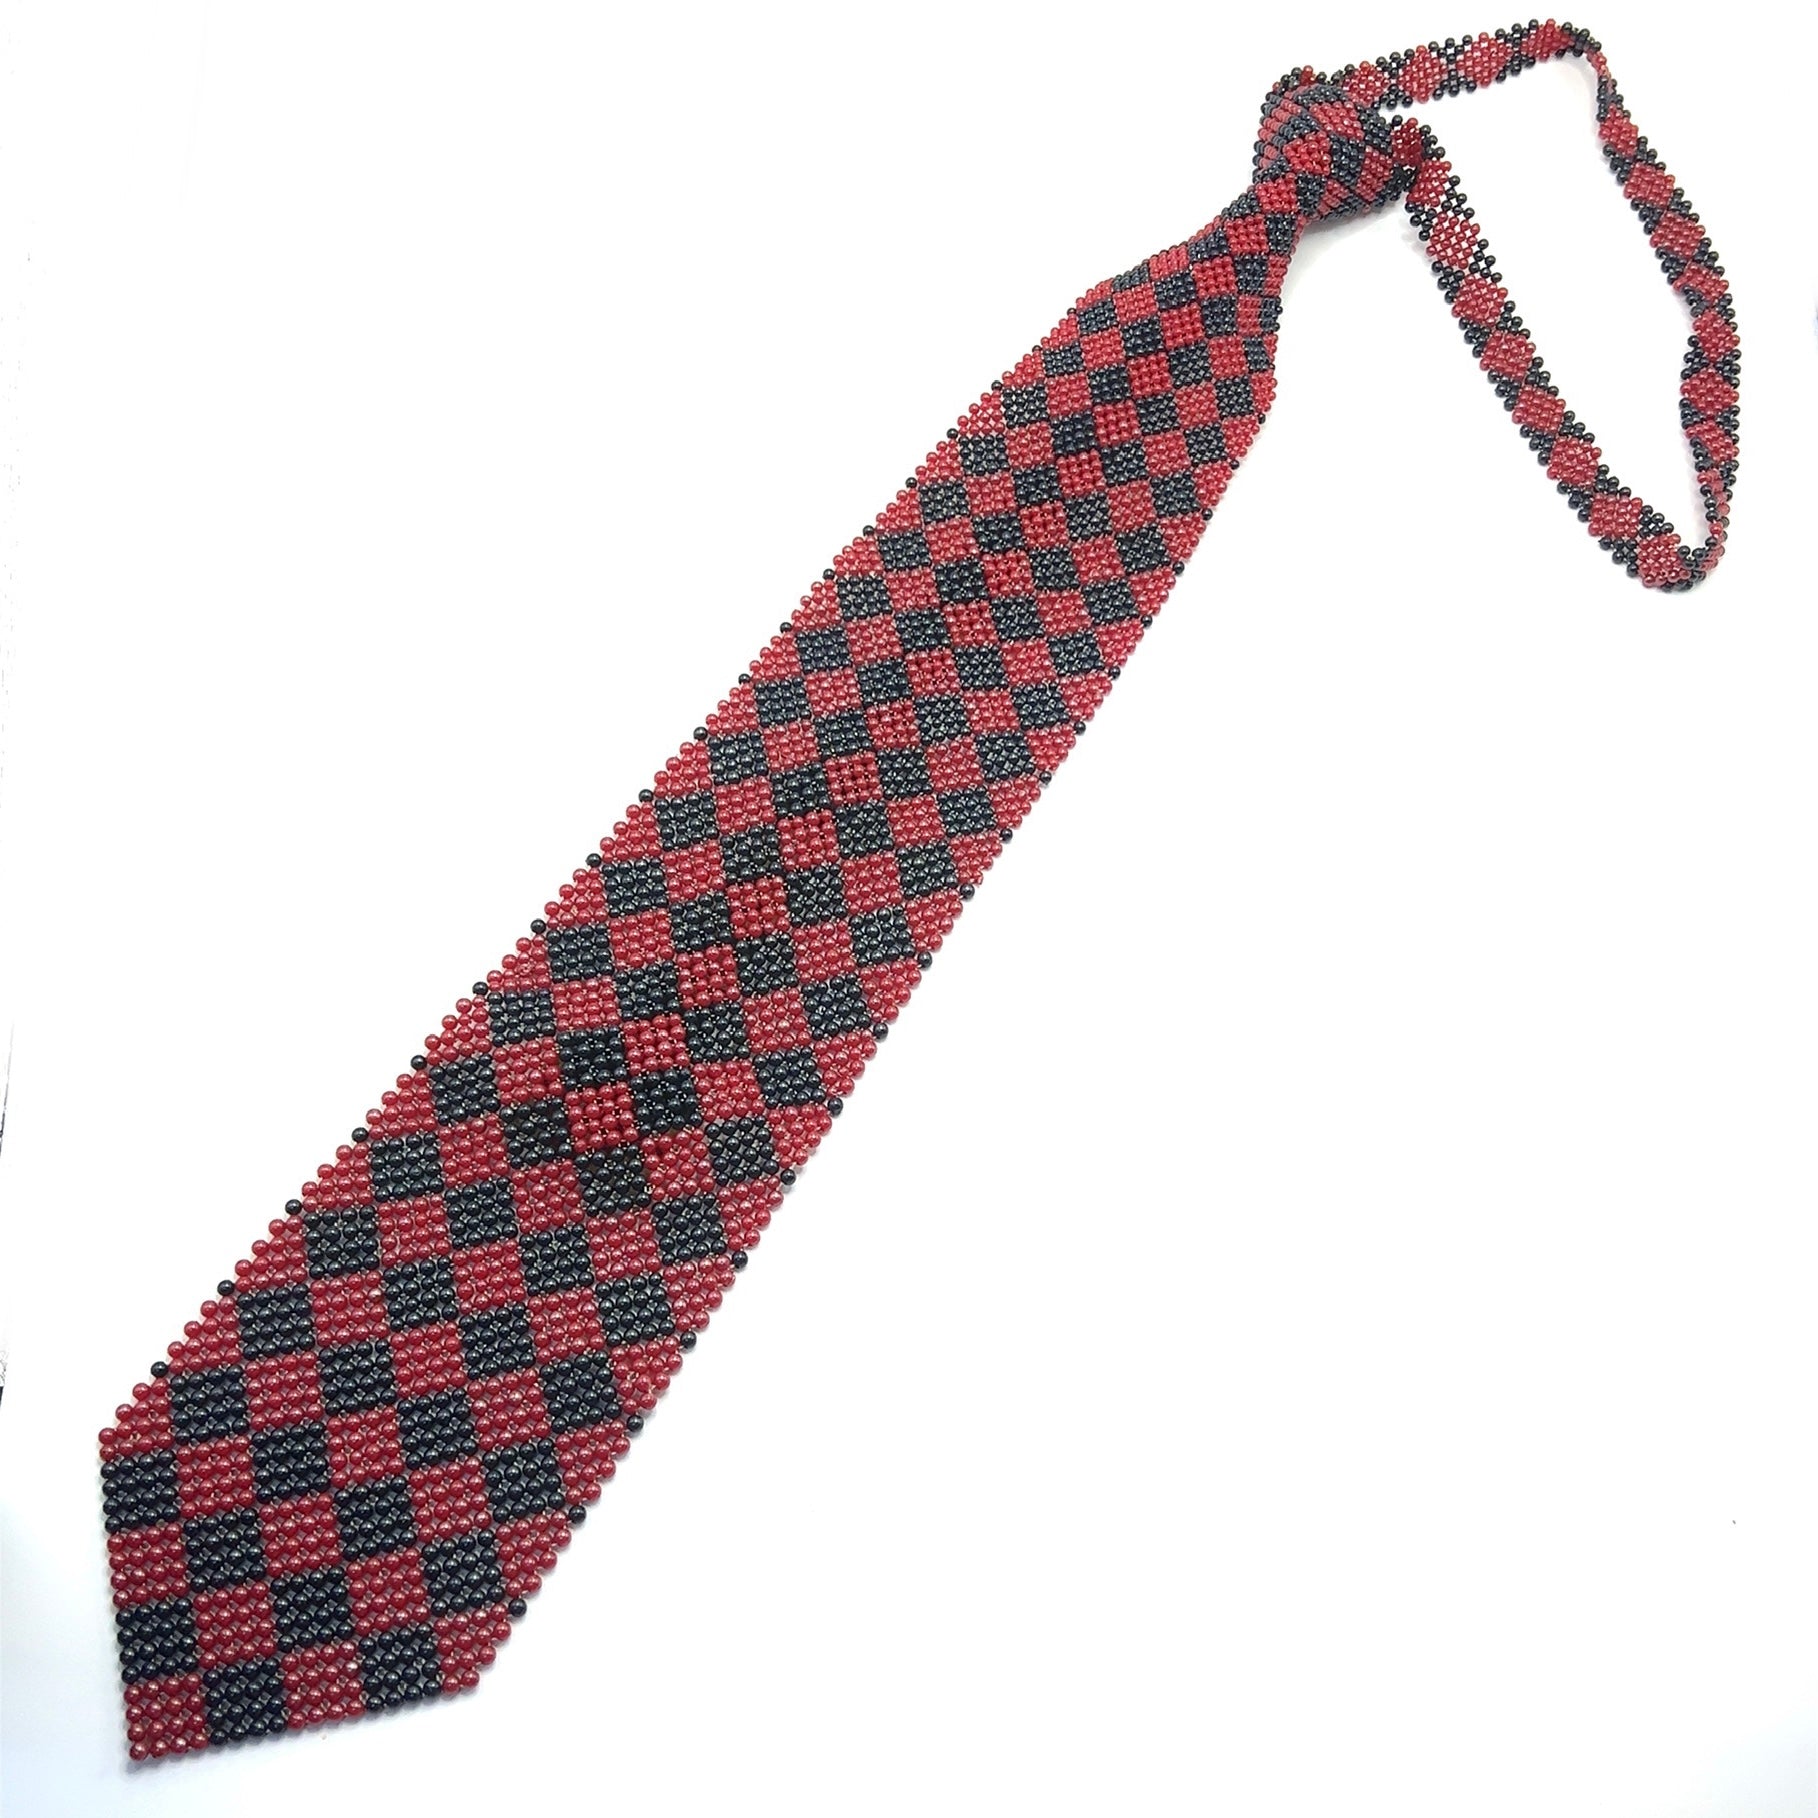 Handcrafted Argyle Pattern Pearl Tie One of a Kind Necktie